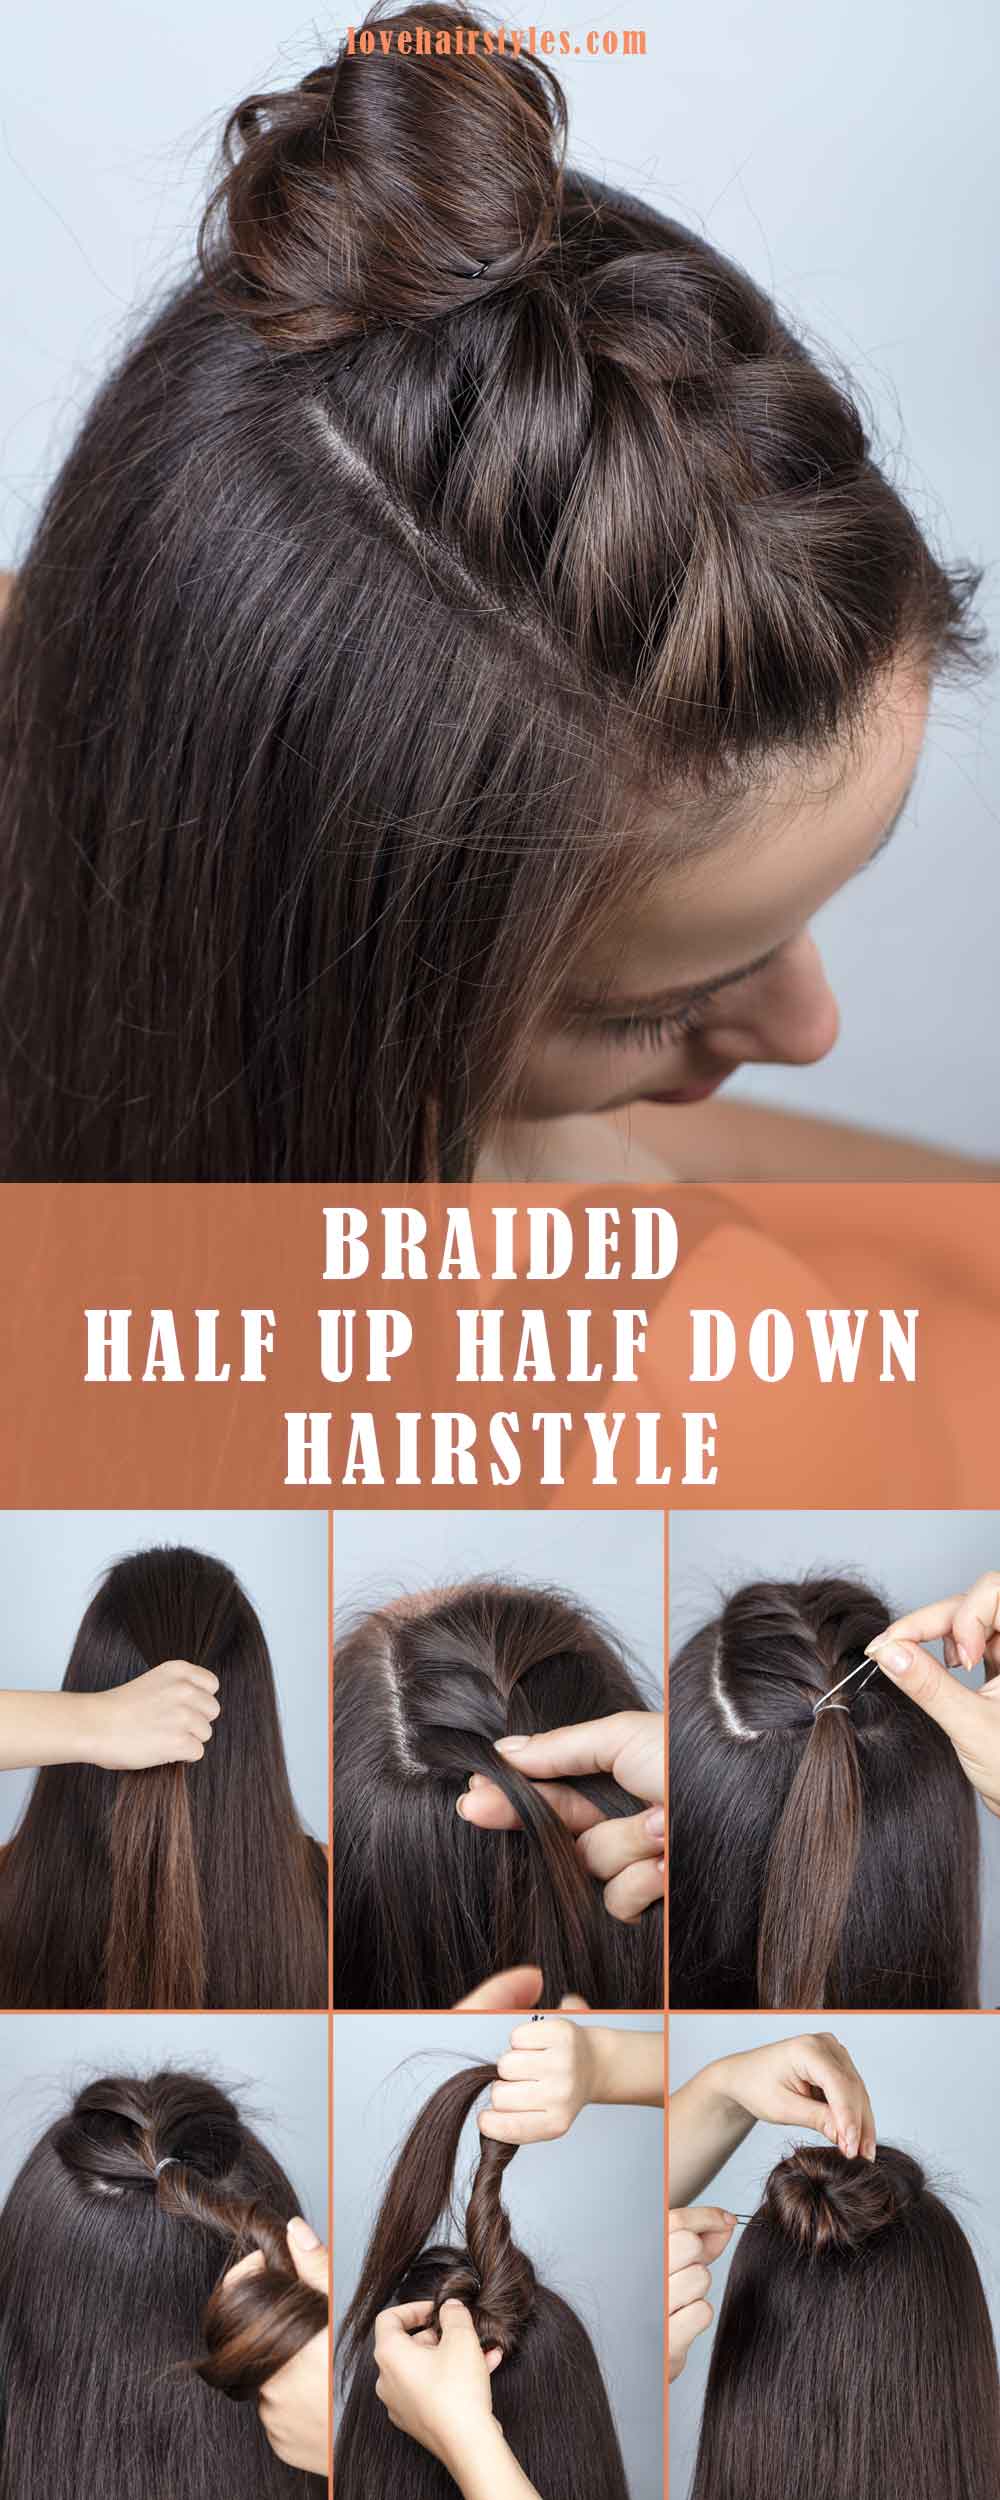 22 Easy Hairstyles For Busy Women | ALYAKA